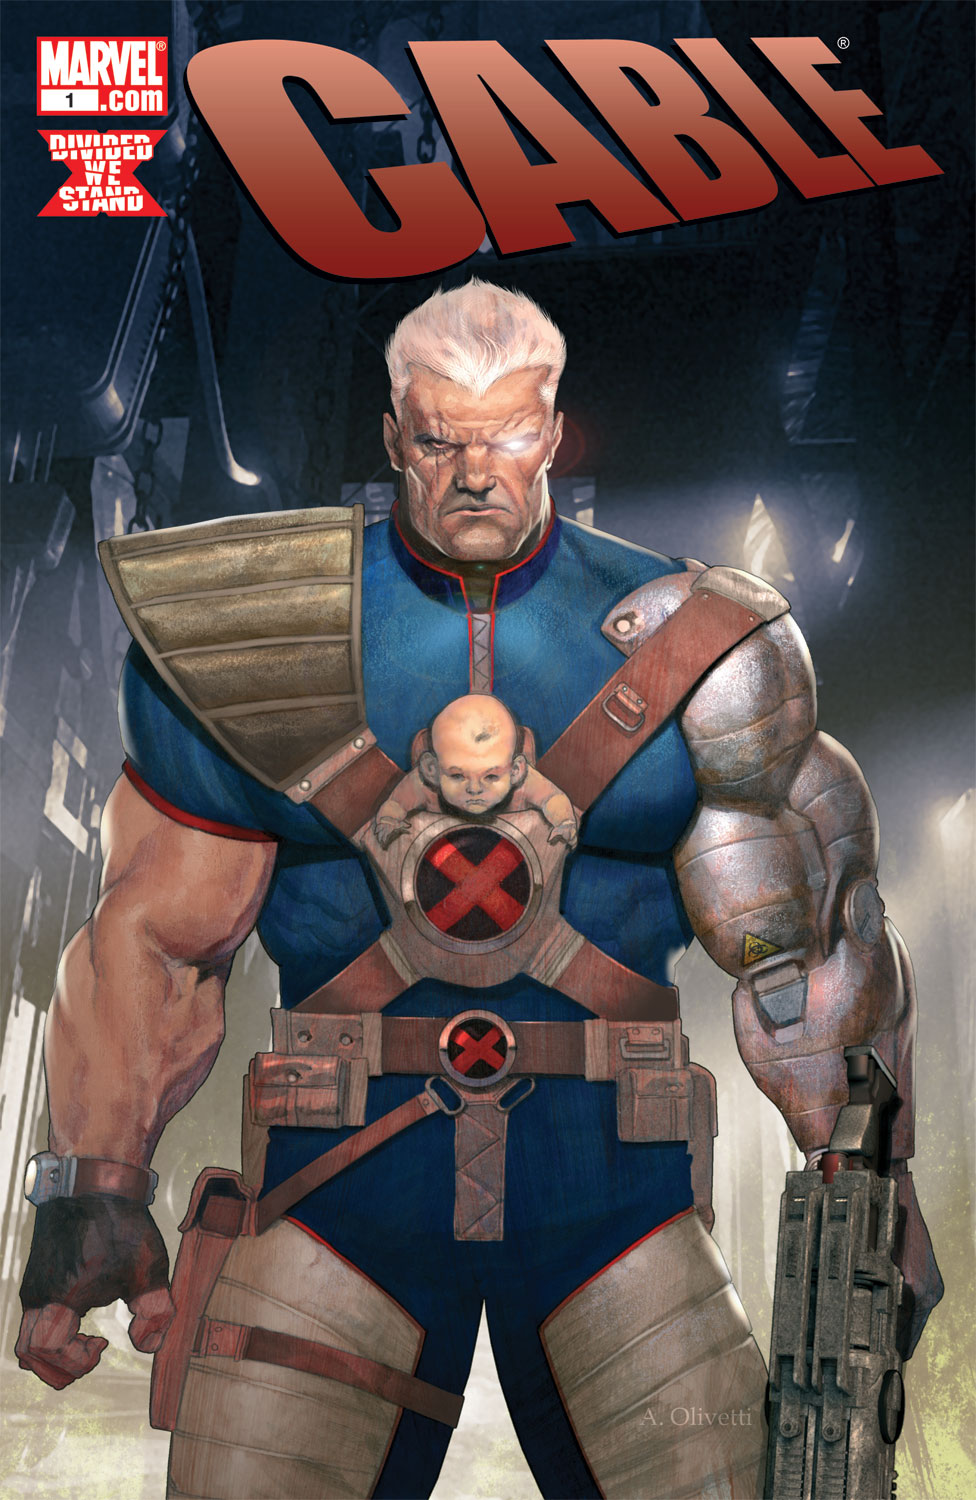 Cable (2008) #1